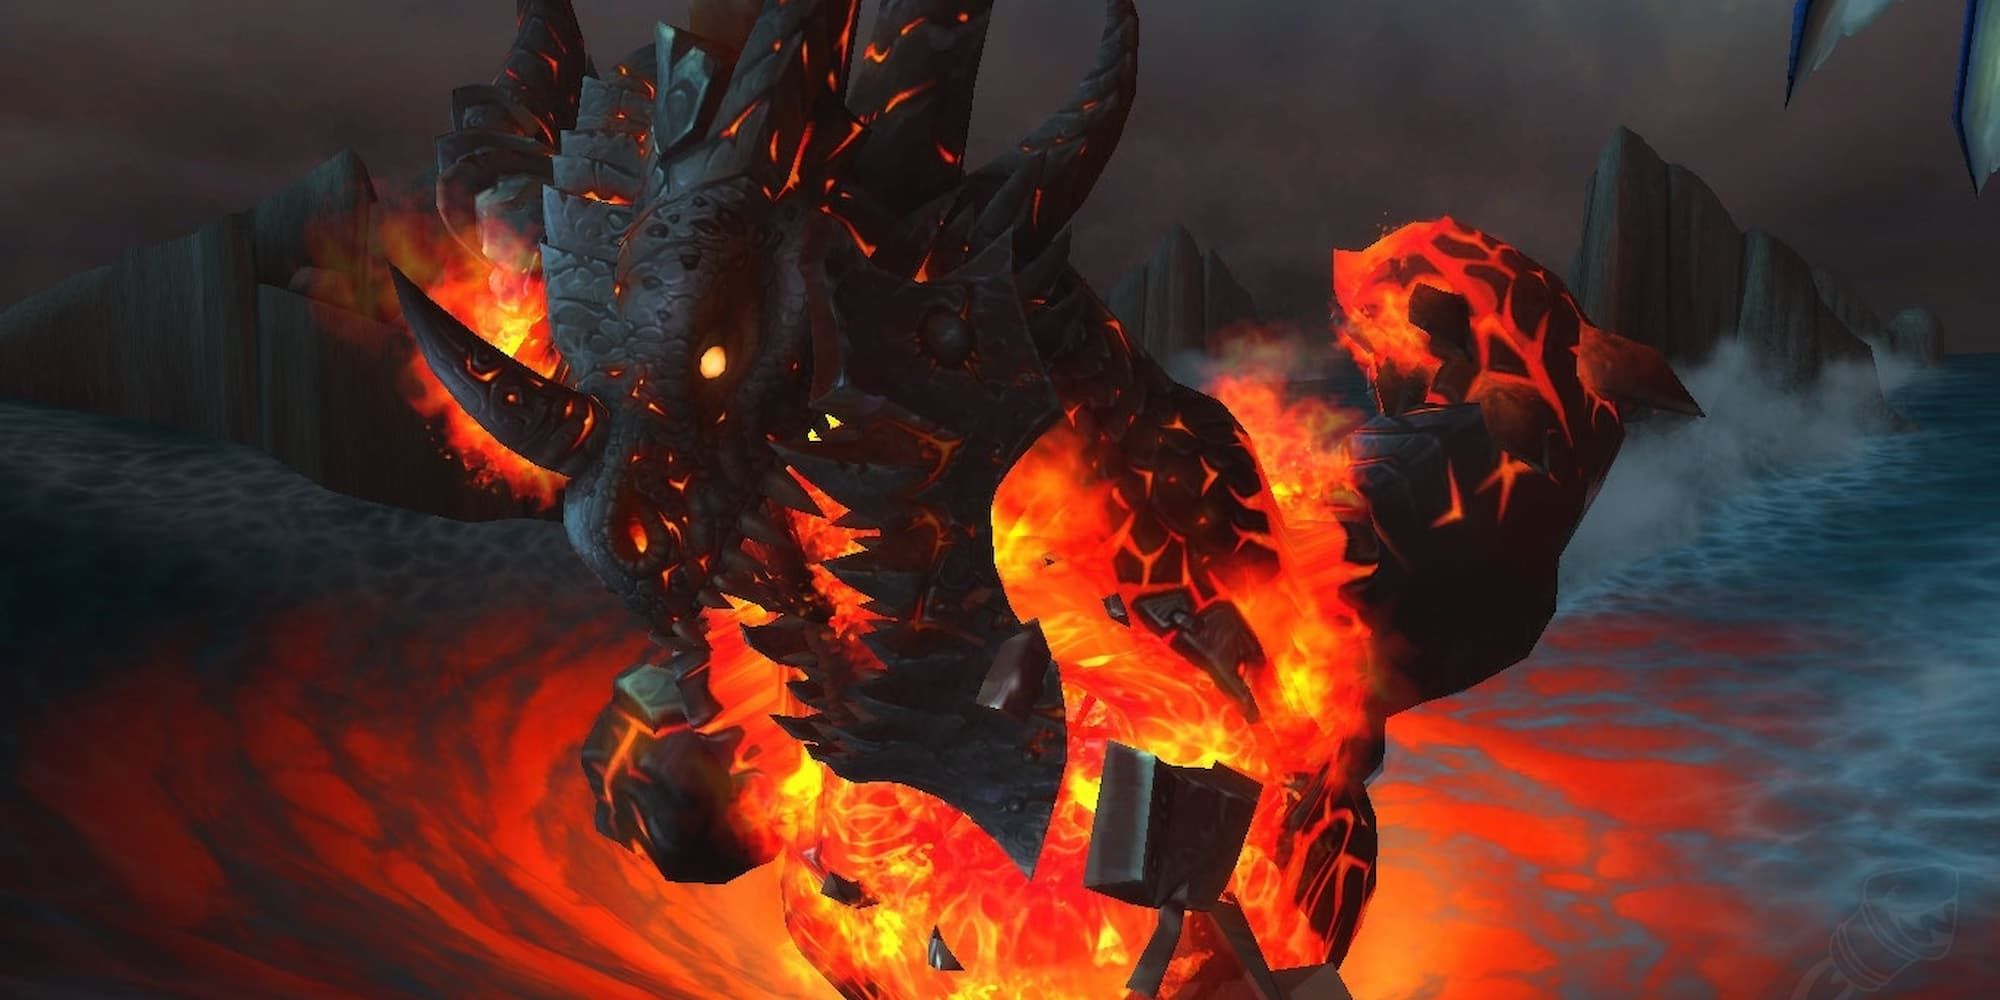 Deathwing the Destroyer lands in the ocean and is exuding lava from his body.